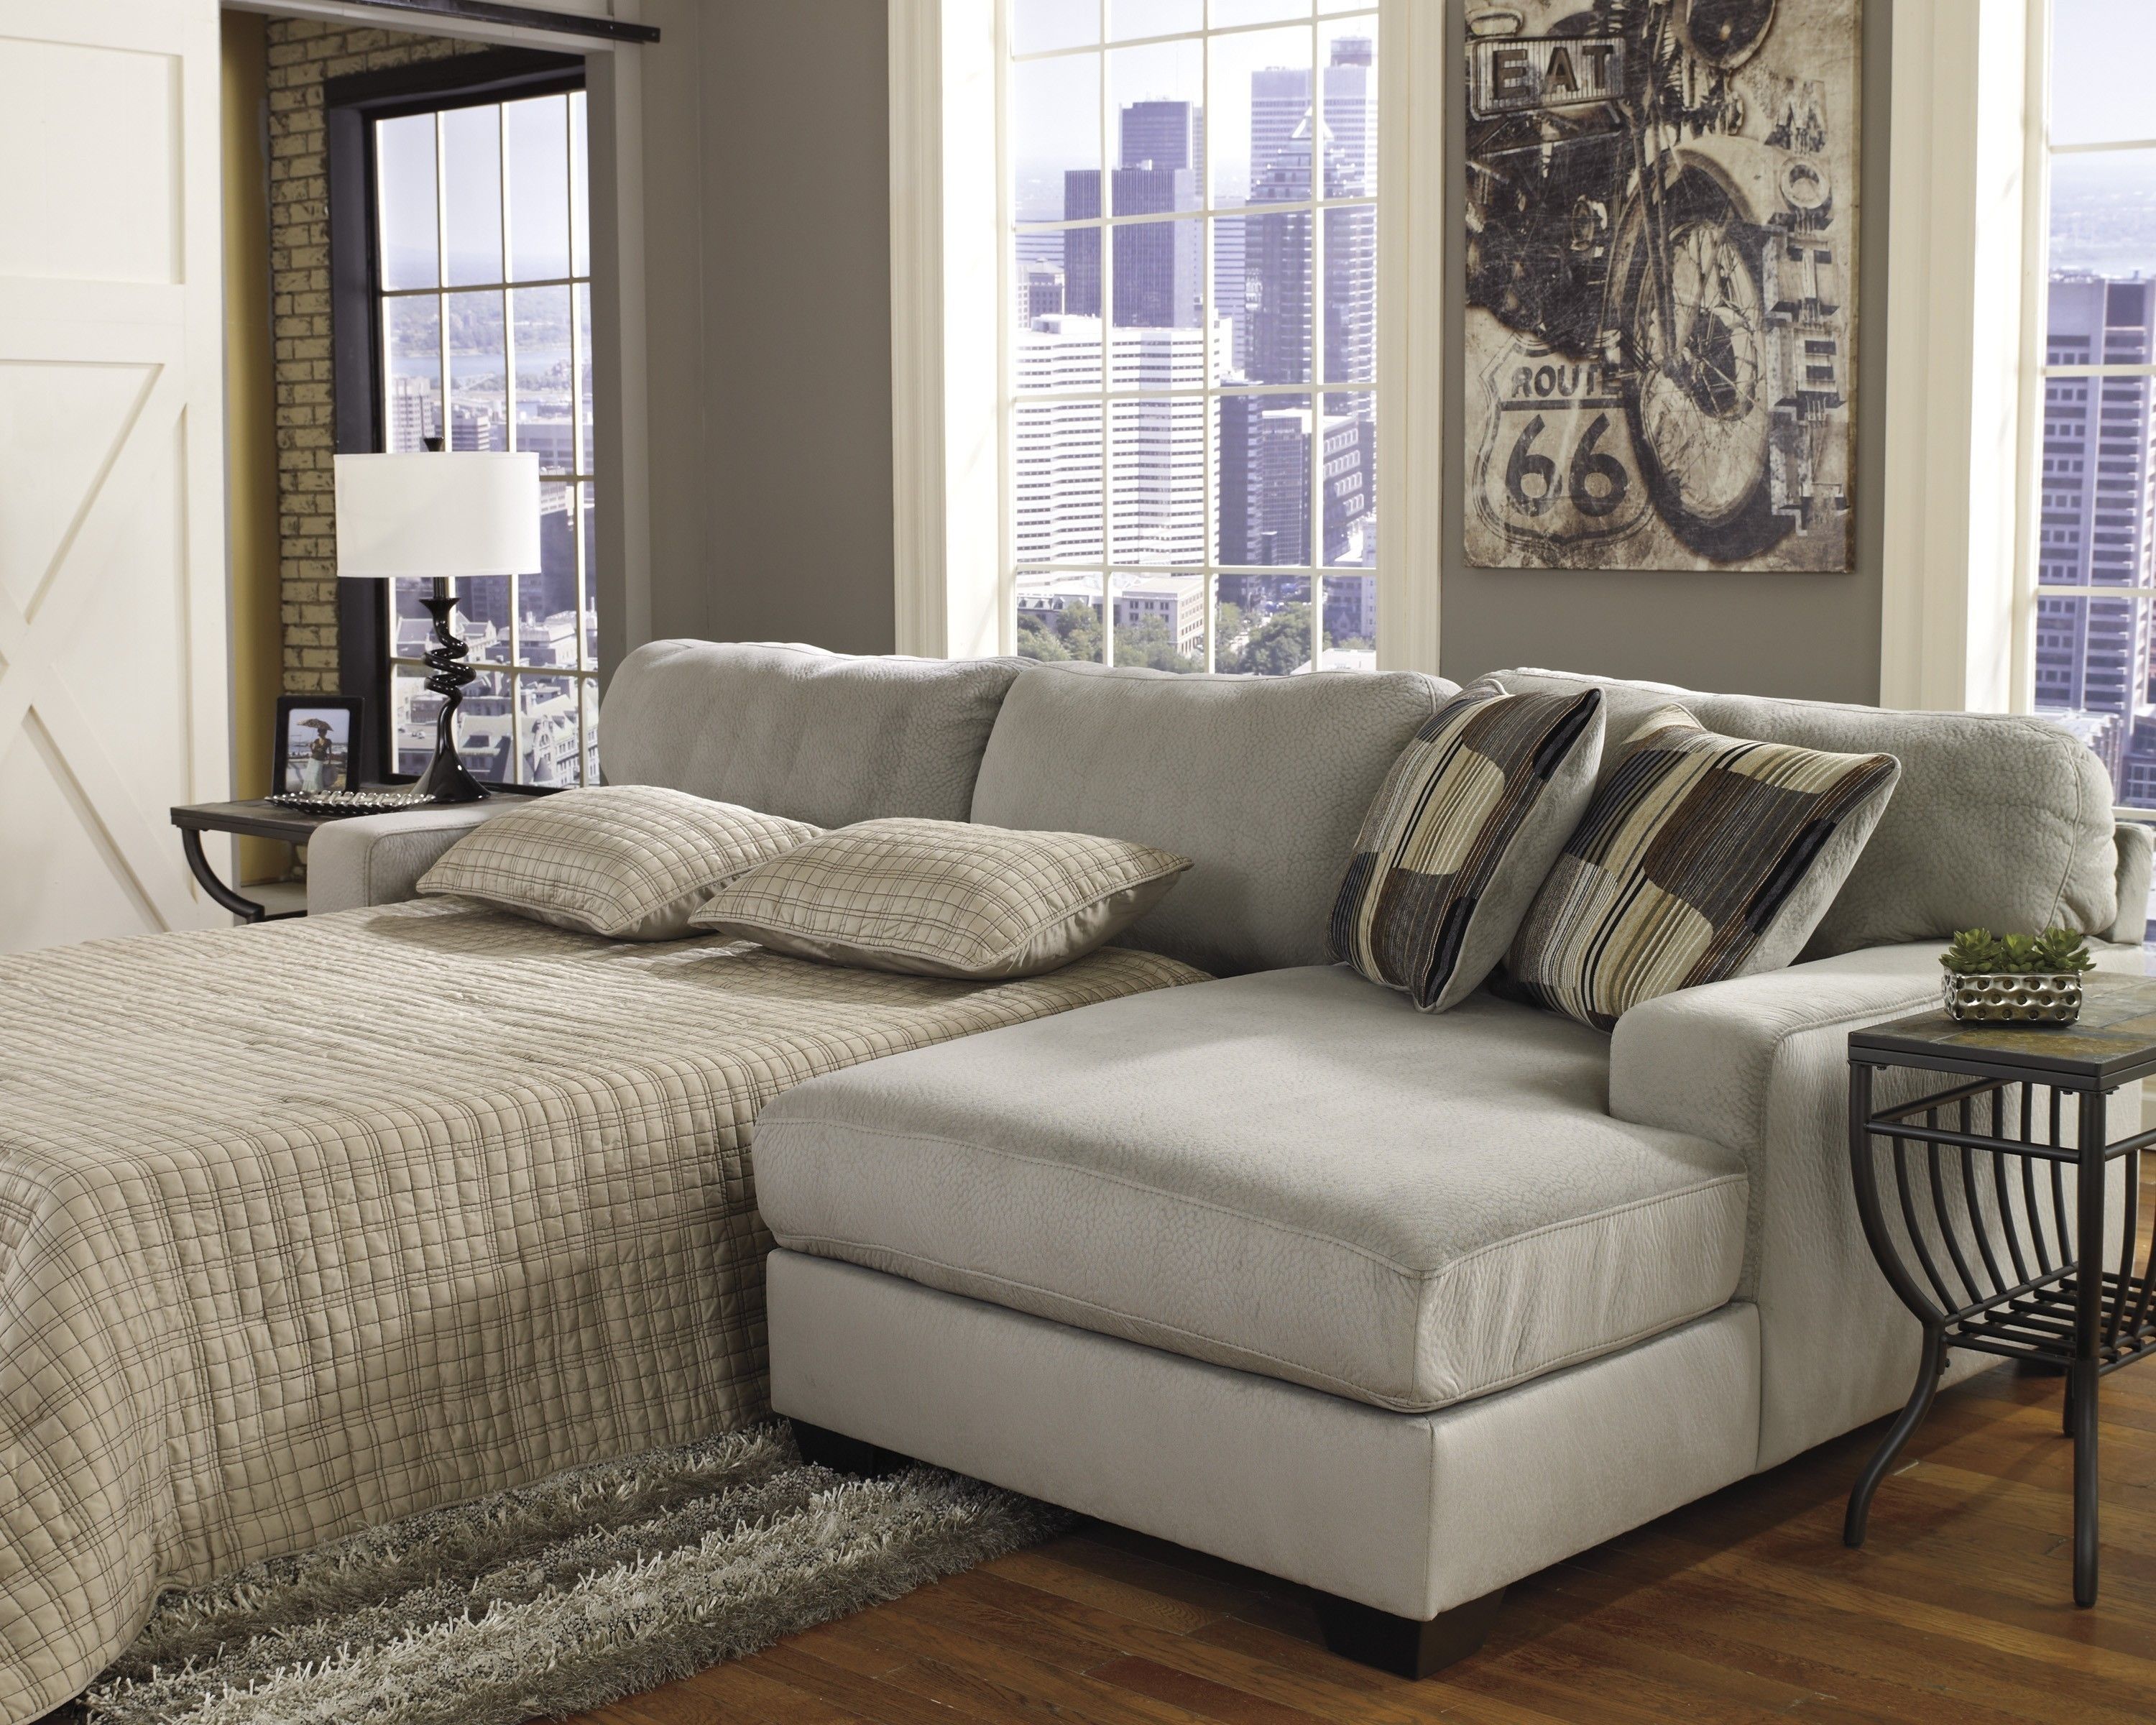 Sectional Sofa With Queen Size Sleeper | Http://tmidb Within Sectional Sofas With Queen Size Sleeper (Photo 2 of 10)